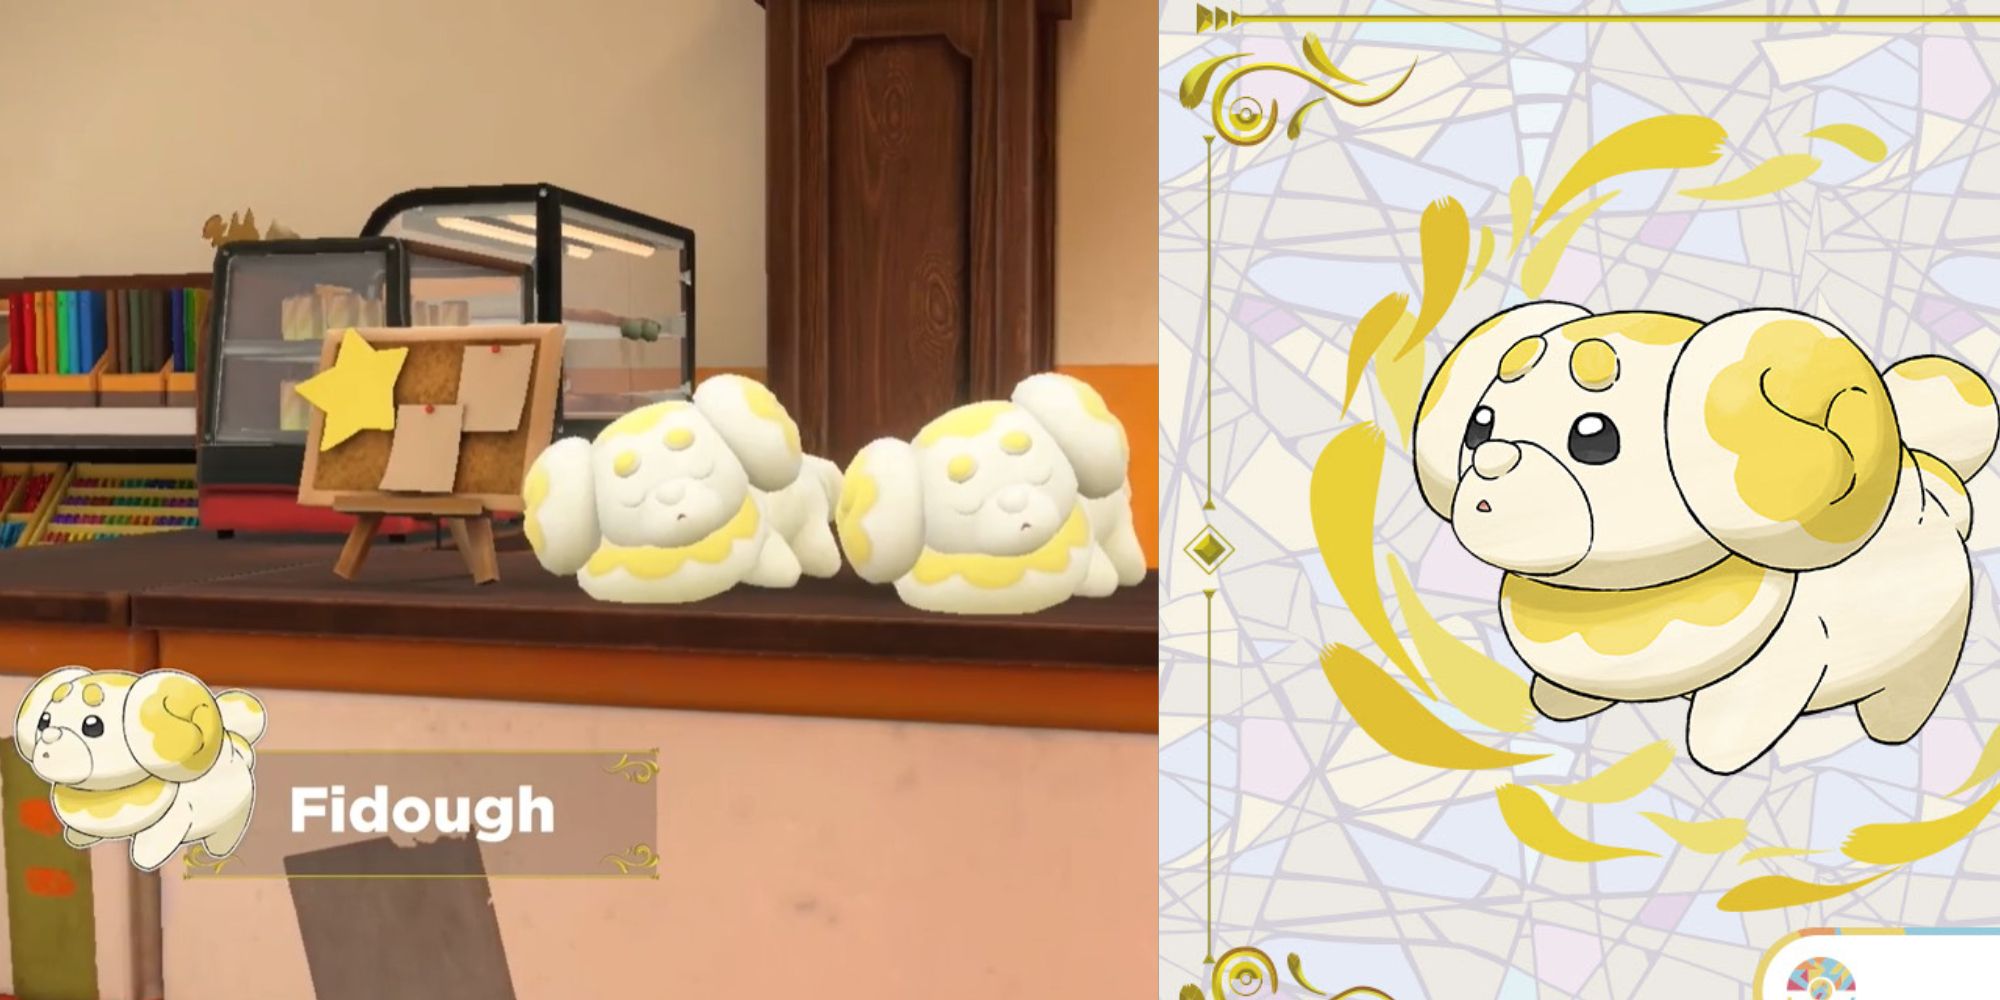 Small and yellow bread puppy Pokémon named Fidough is pictured.